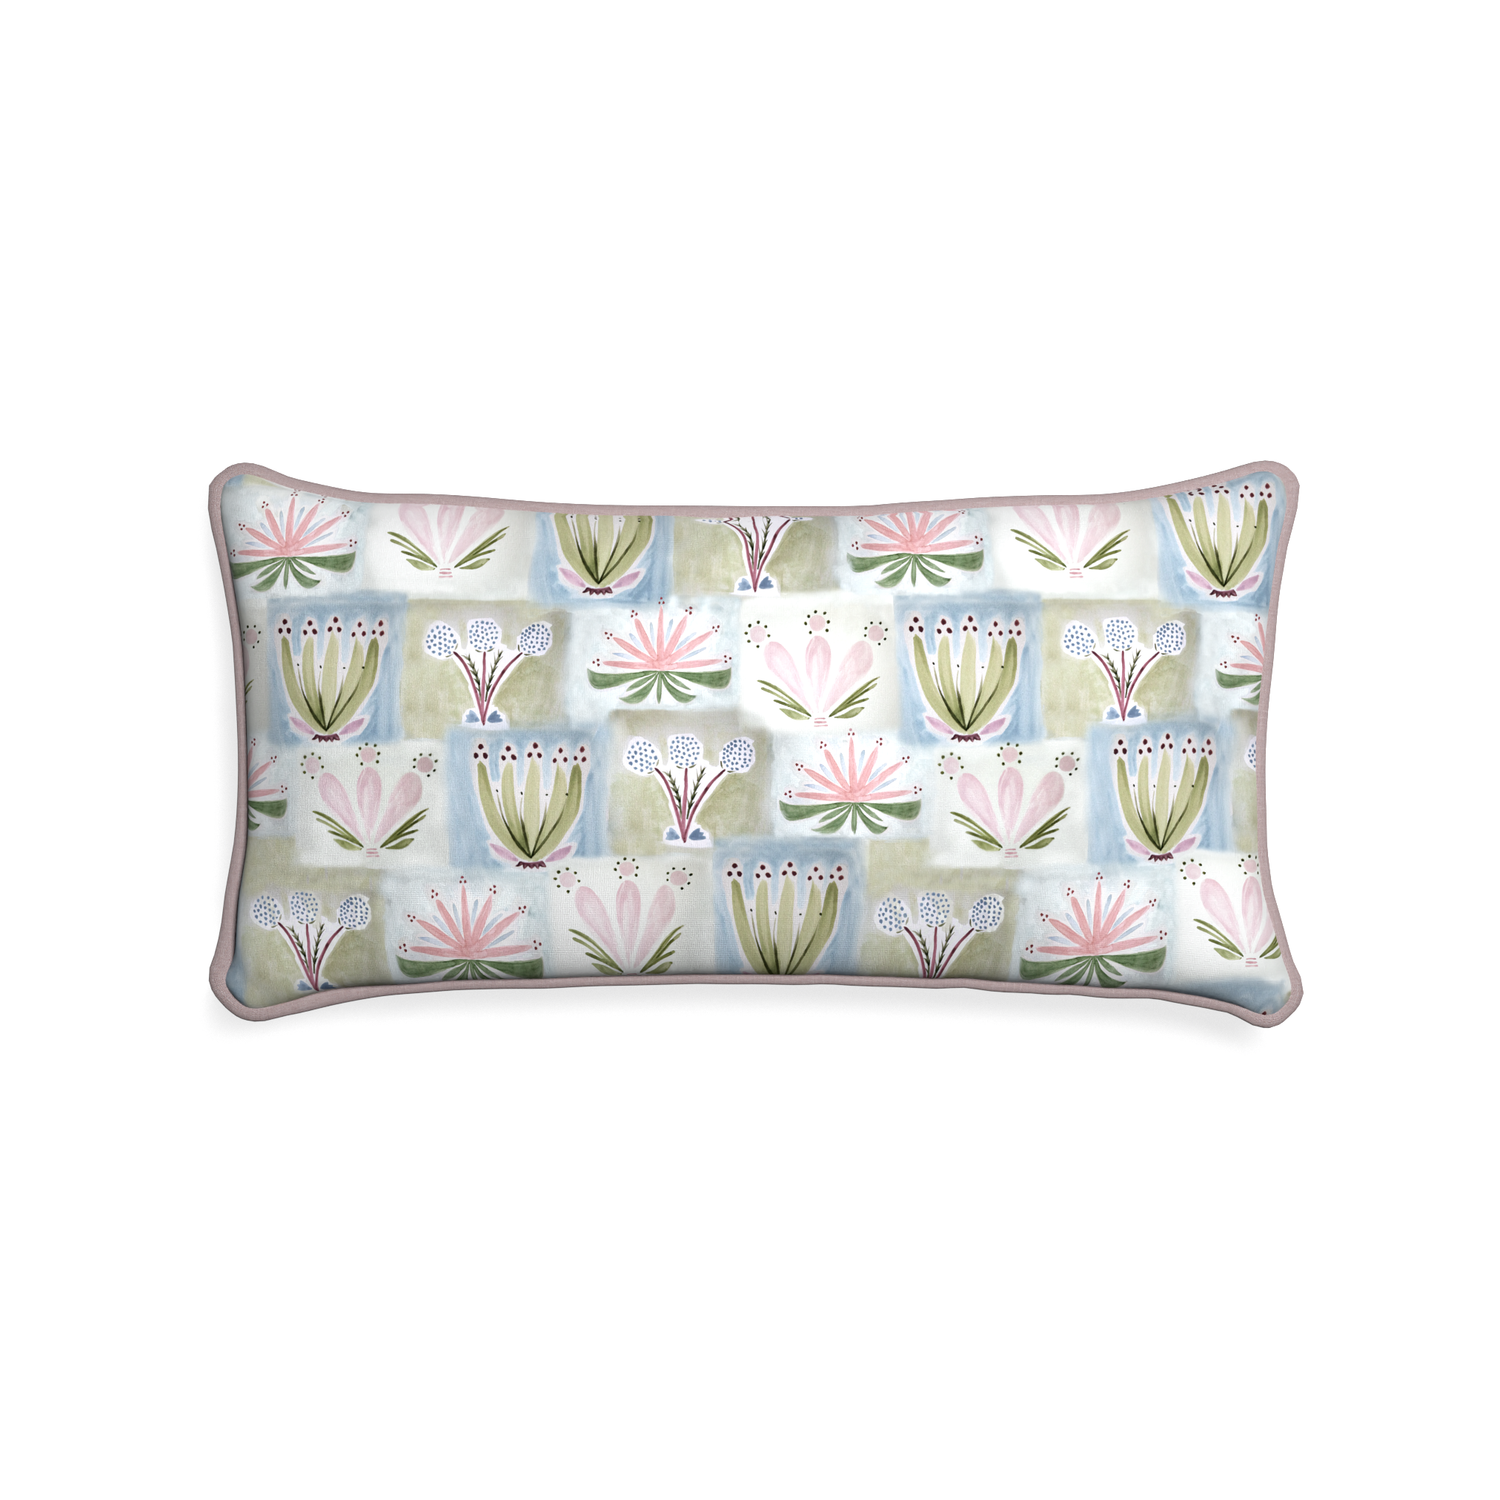 Midi-lumbar harper custom hand-painted floralpillow with orchid piping on white background